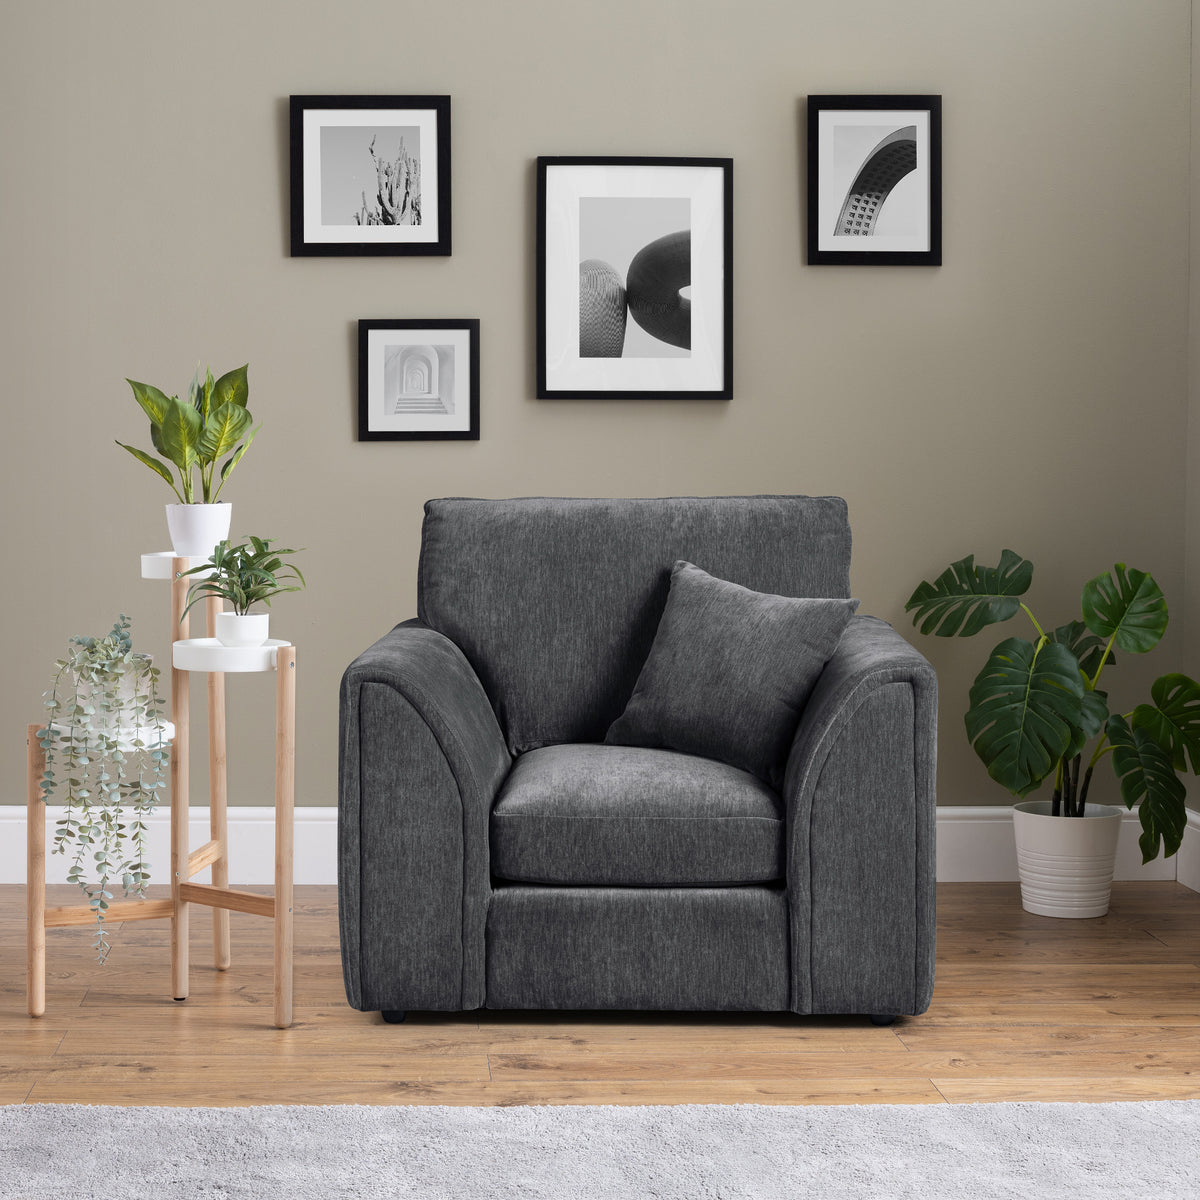 Dunford Charcoal Grey Armchair for living room